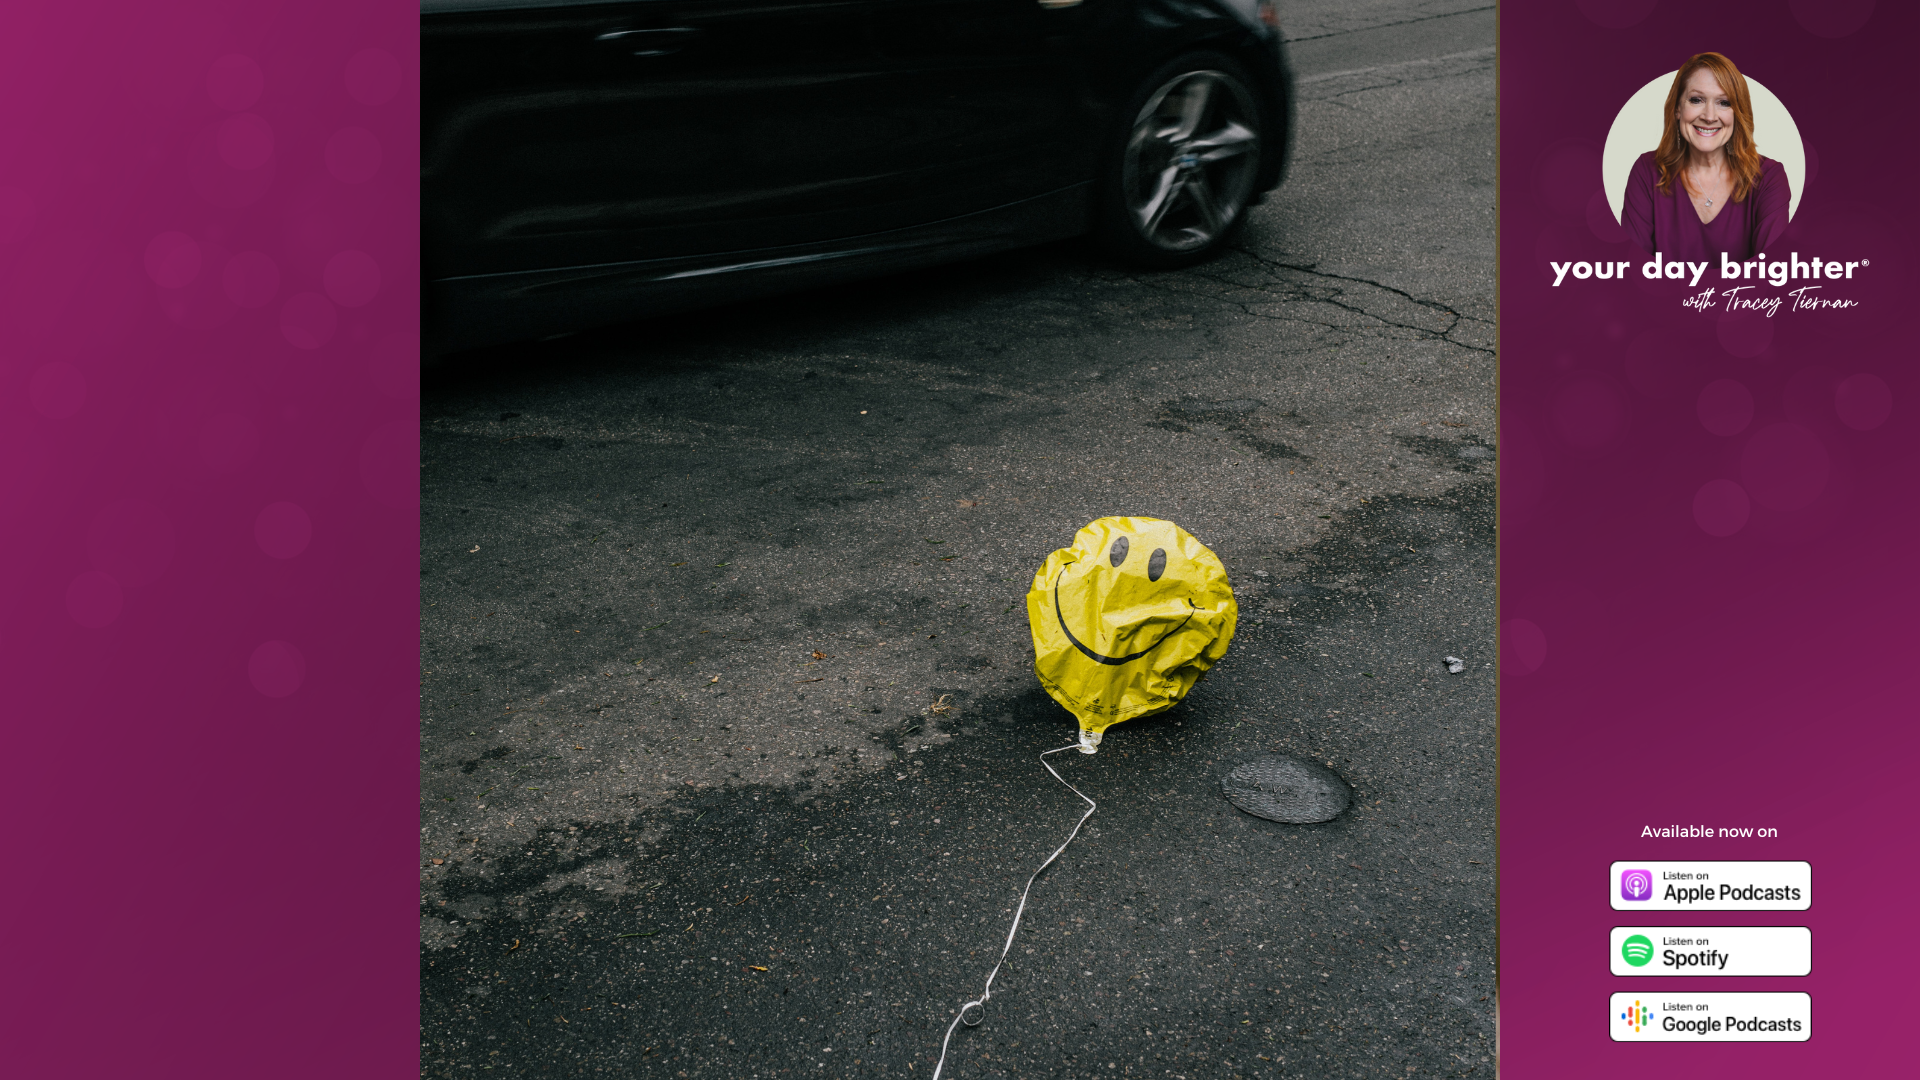 deflated yellow balloon with a smiley face on it laying in the street